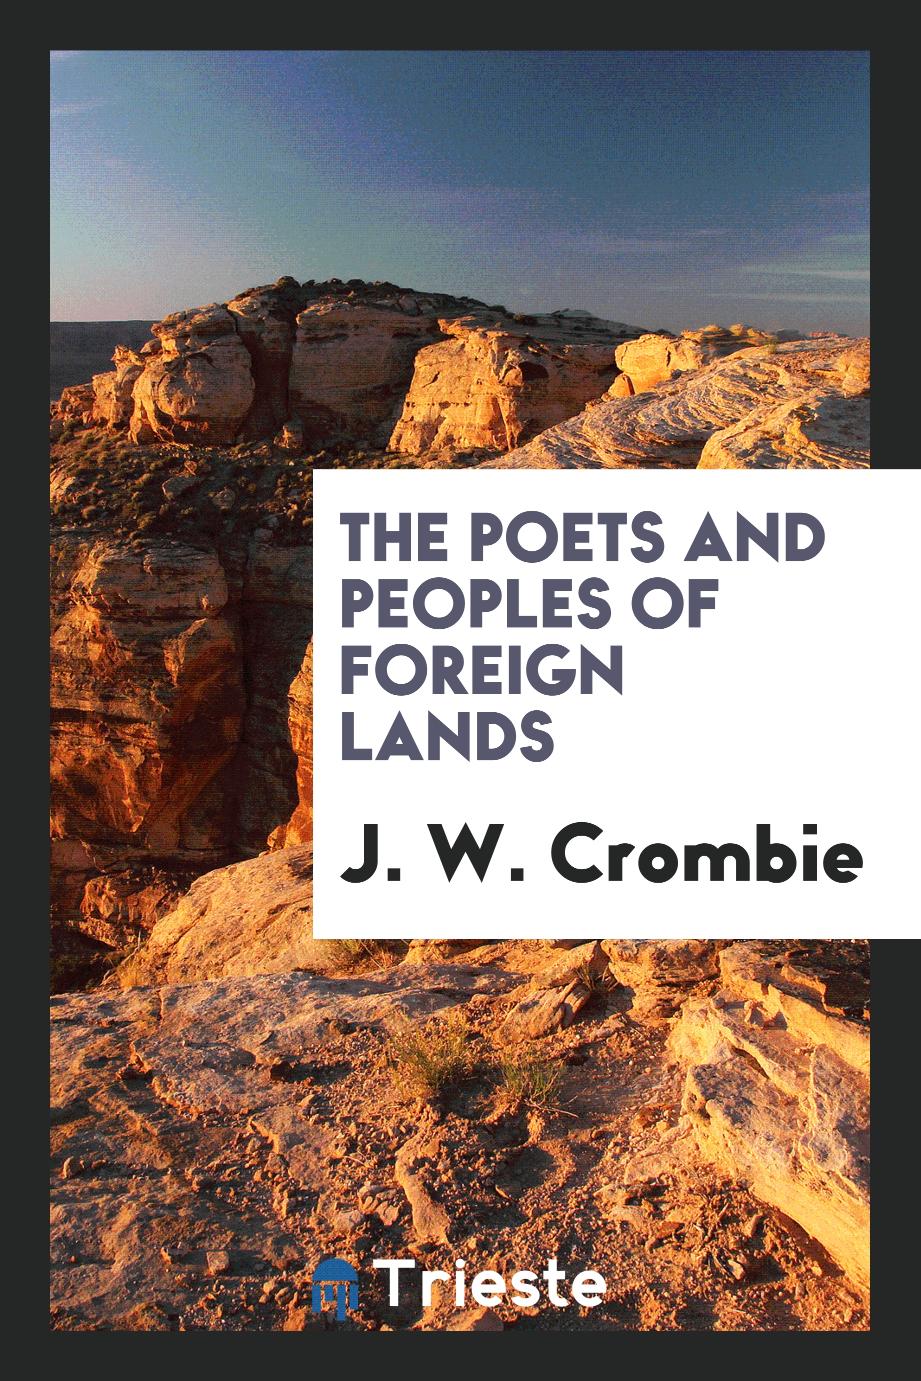 The Poets and Peoples of Foreign Lands